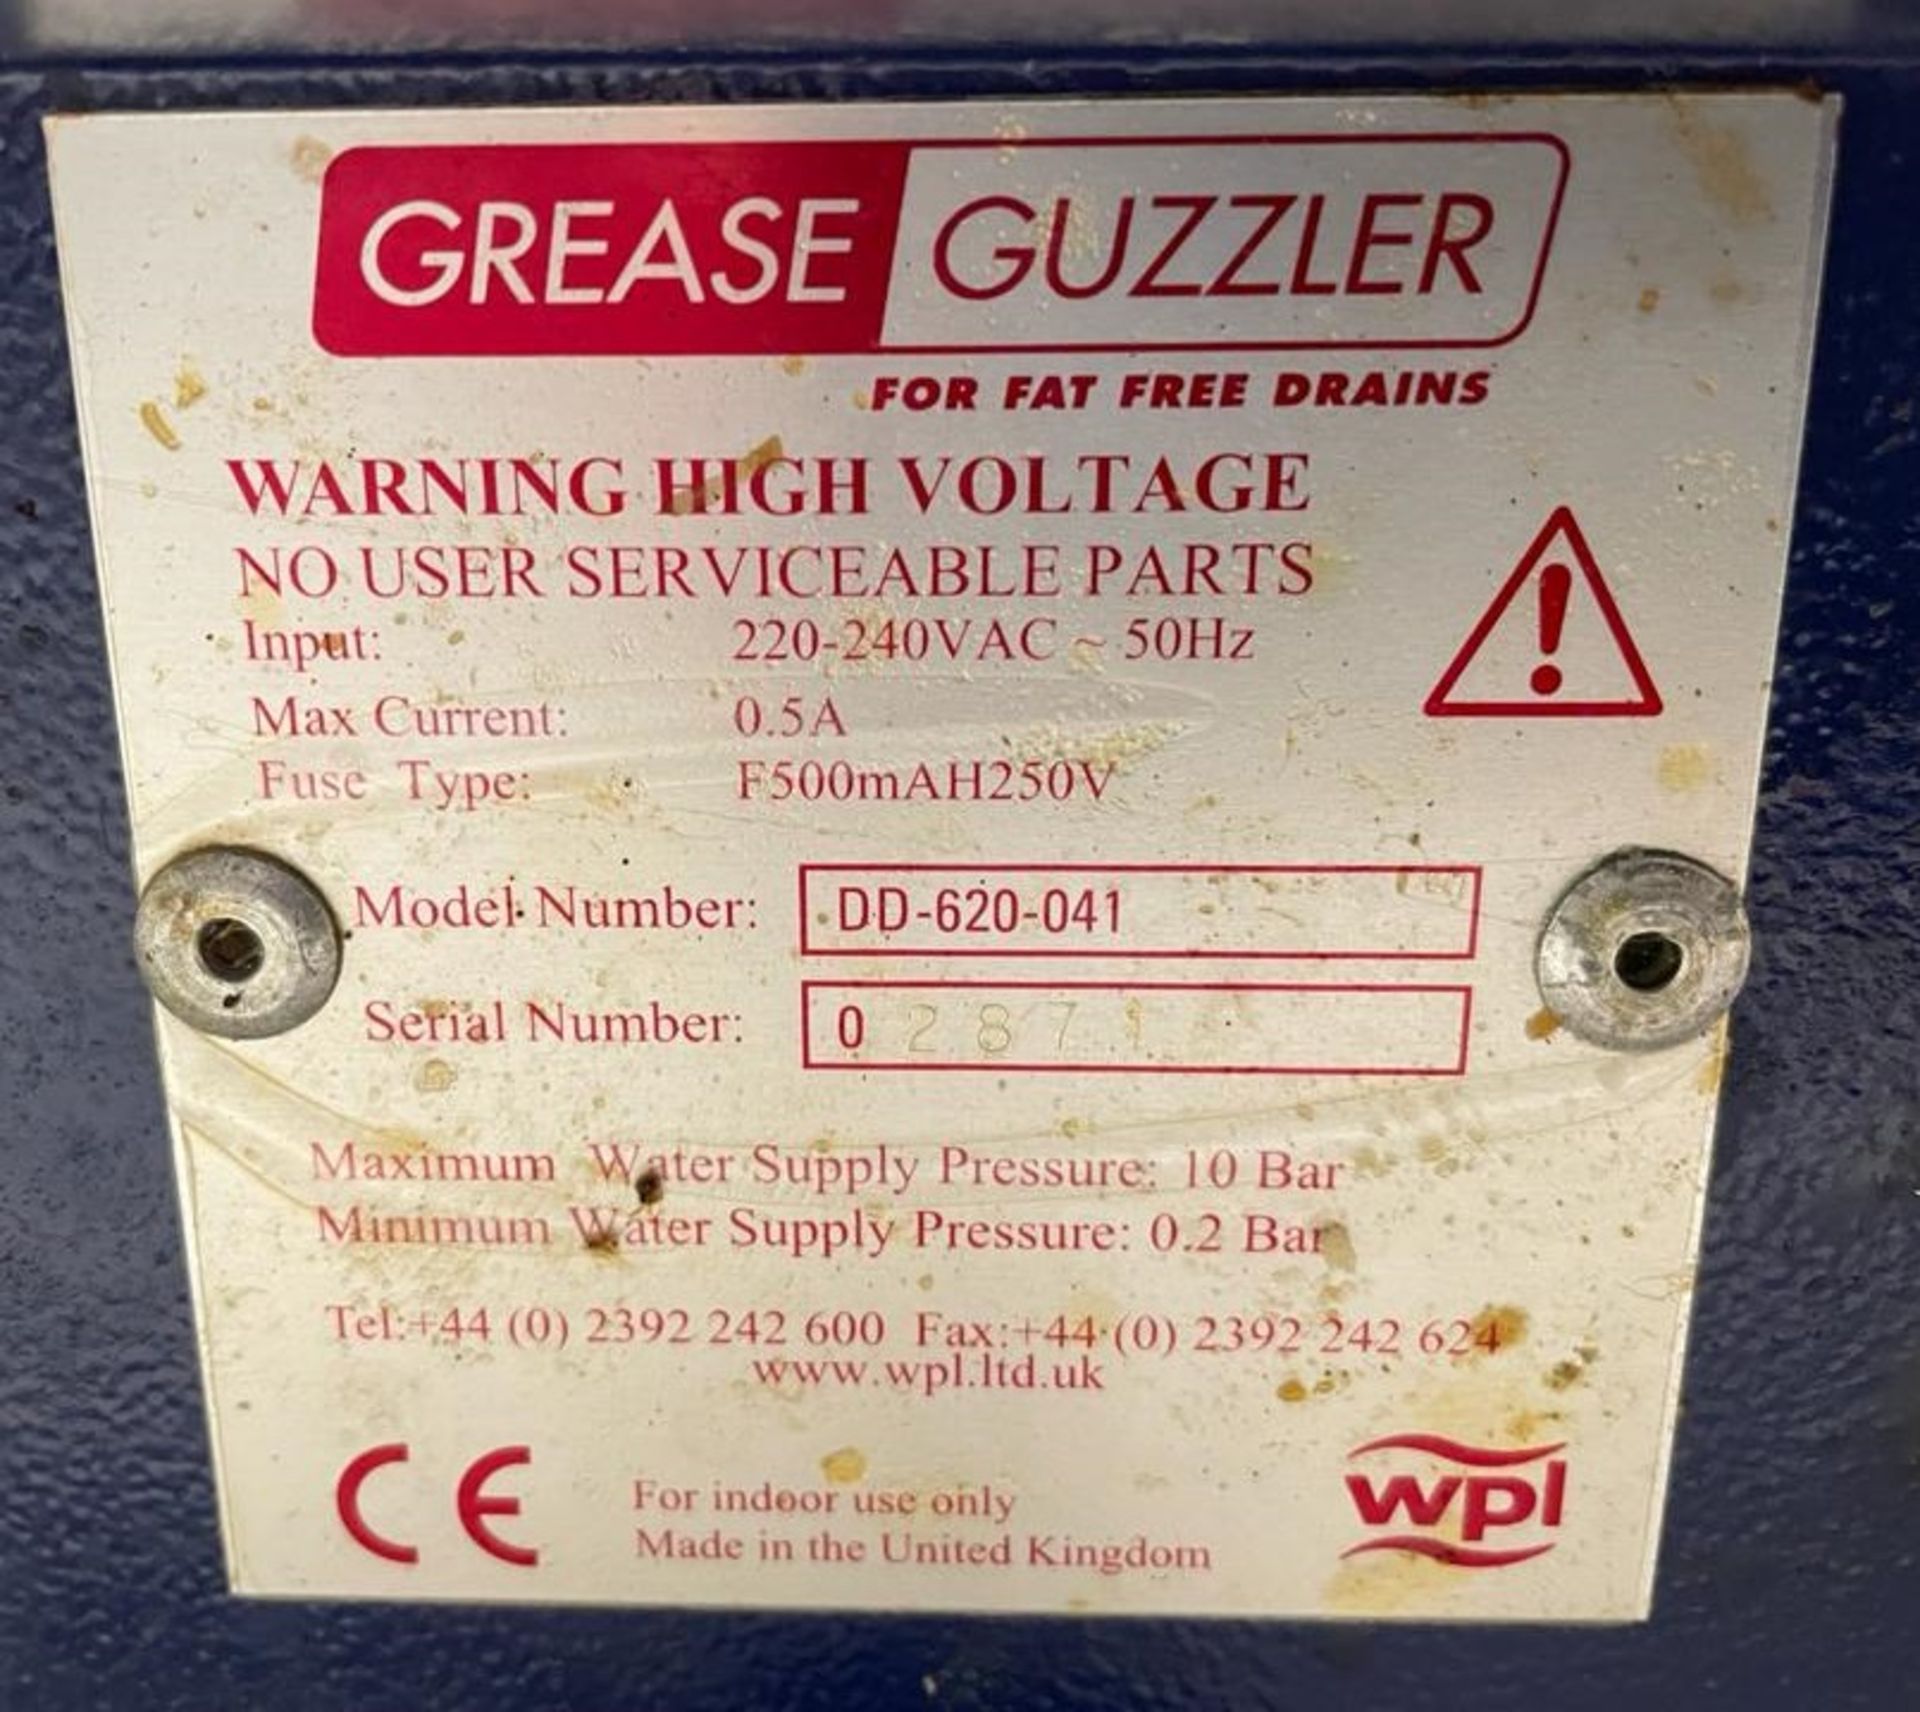 1 x Grease Guzzler - Patented Grease Management System - Model Number DD-620-041 - CL666 - Location: - Image 5 of 5